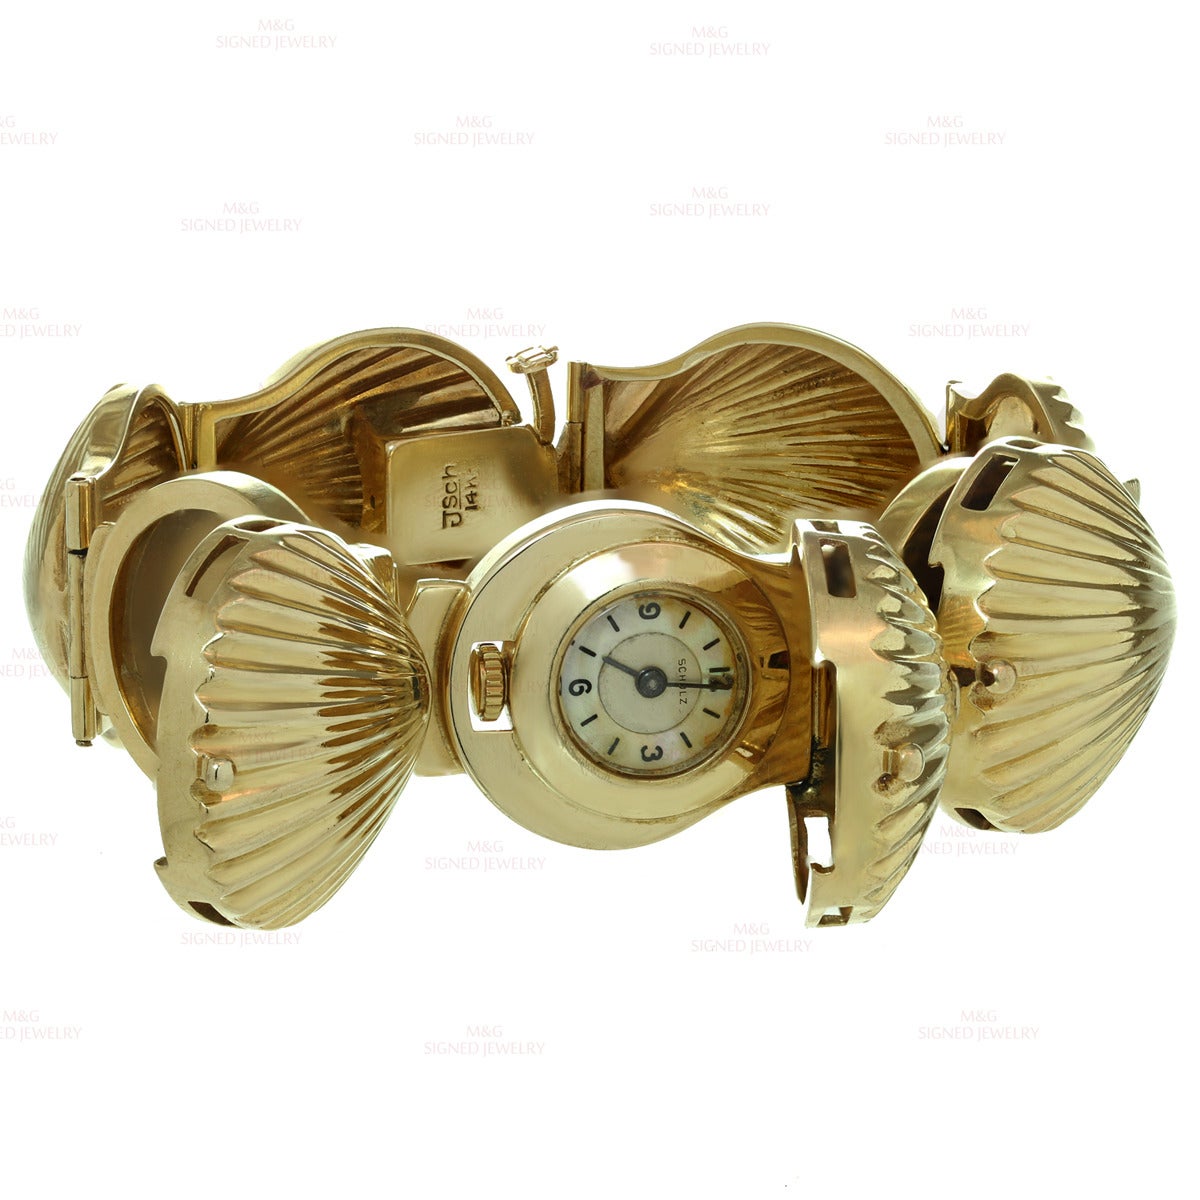 This elegant watch bracelet features seashell links made in 14k yellow gold and completed with 2 hidden side lockets and 1 center locket containing a timepiece. The center locket is set with brilliant-cut round H-I VS1-VS2 diamonds of an estimated